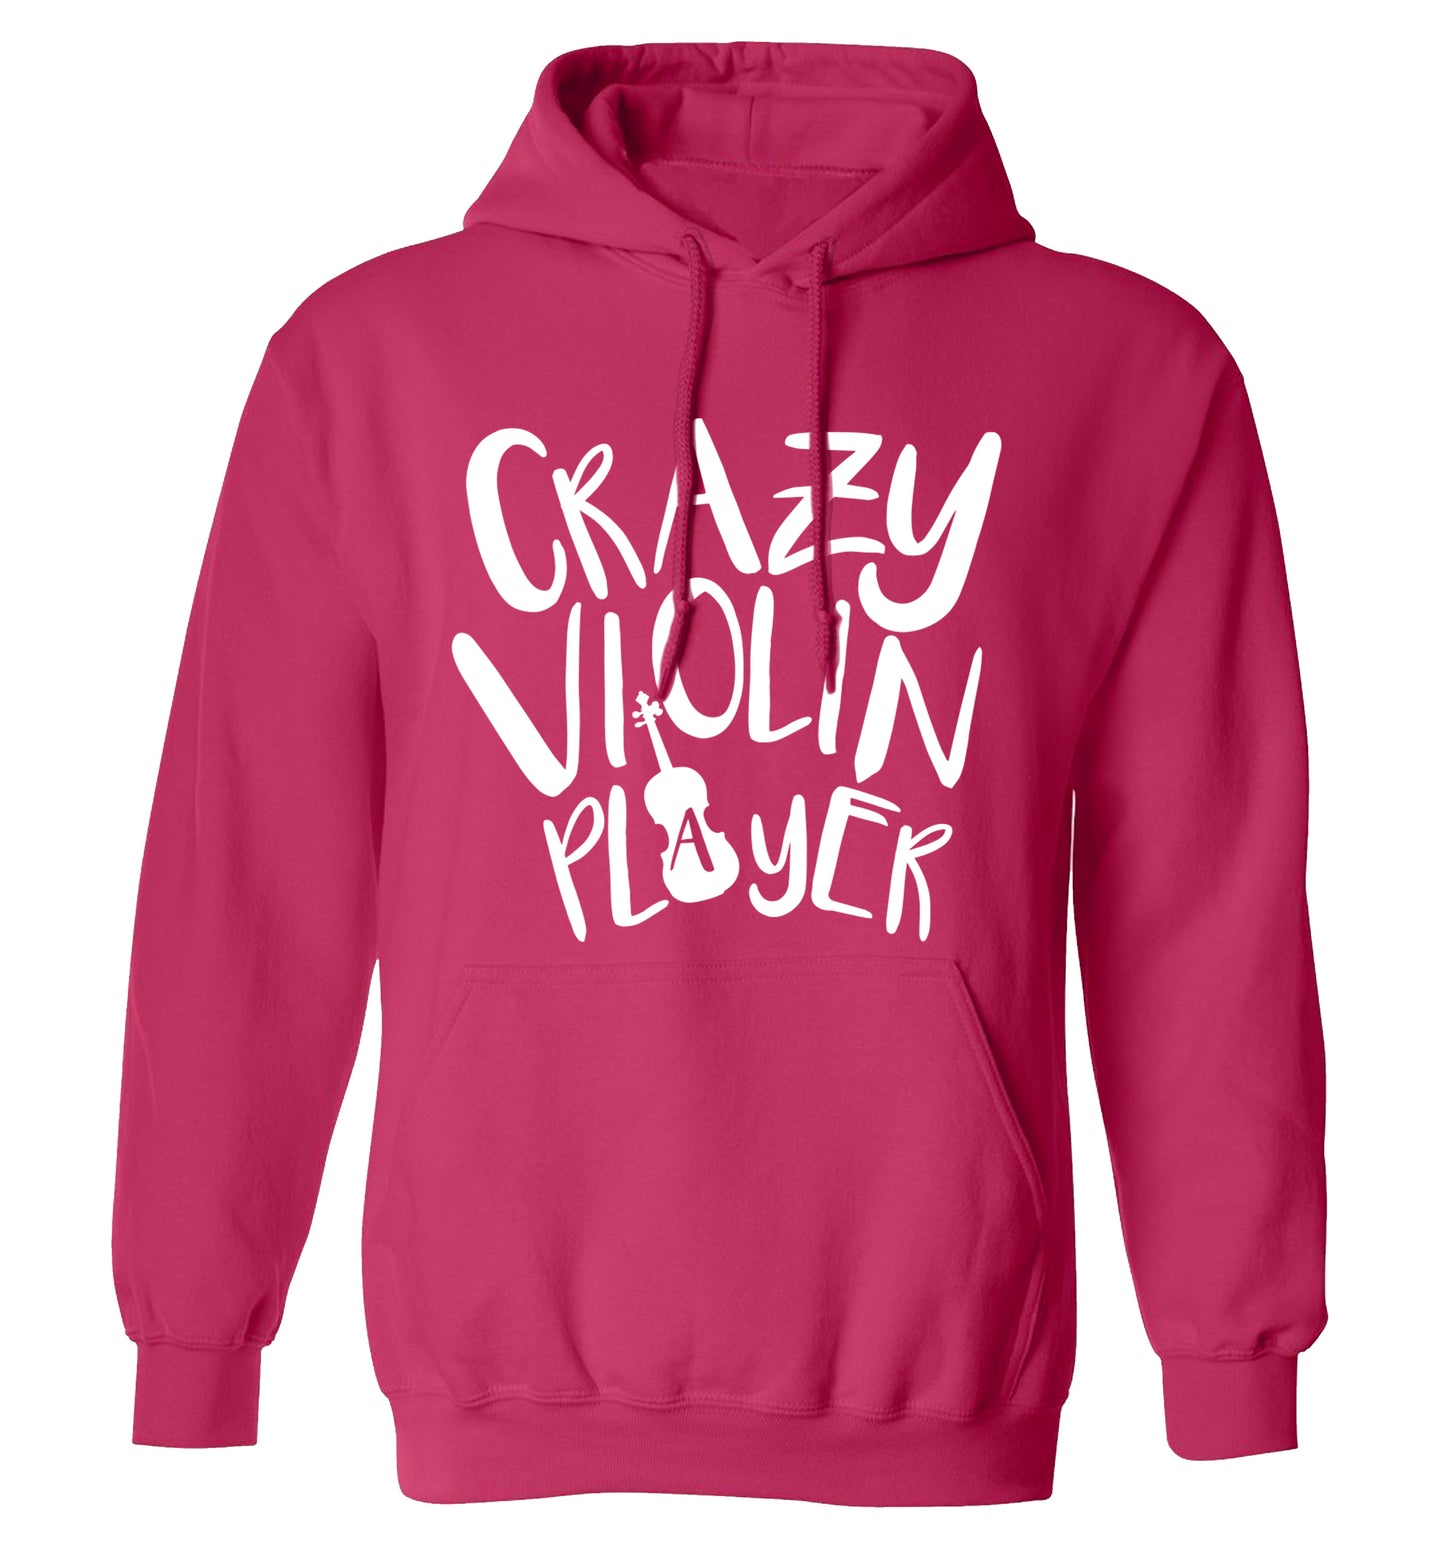 Crazy Violin Player adults unisex pink hoodie 2XL